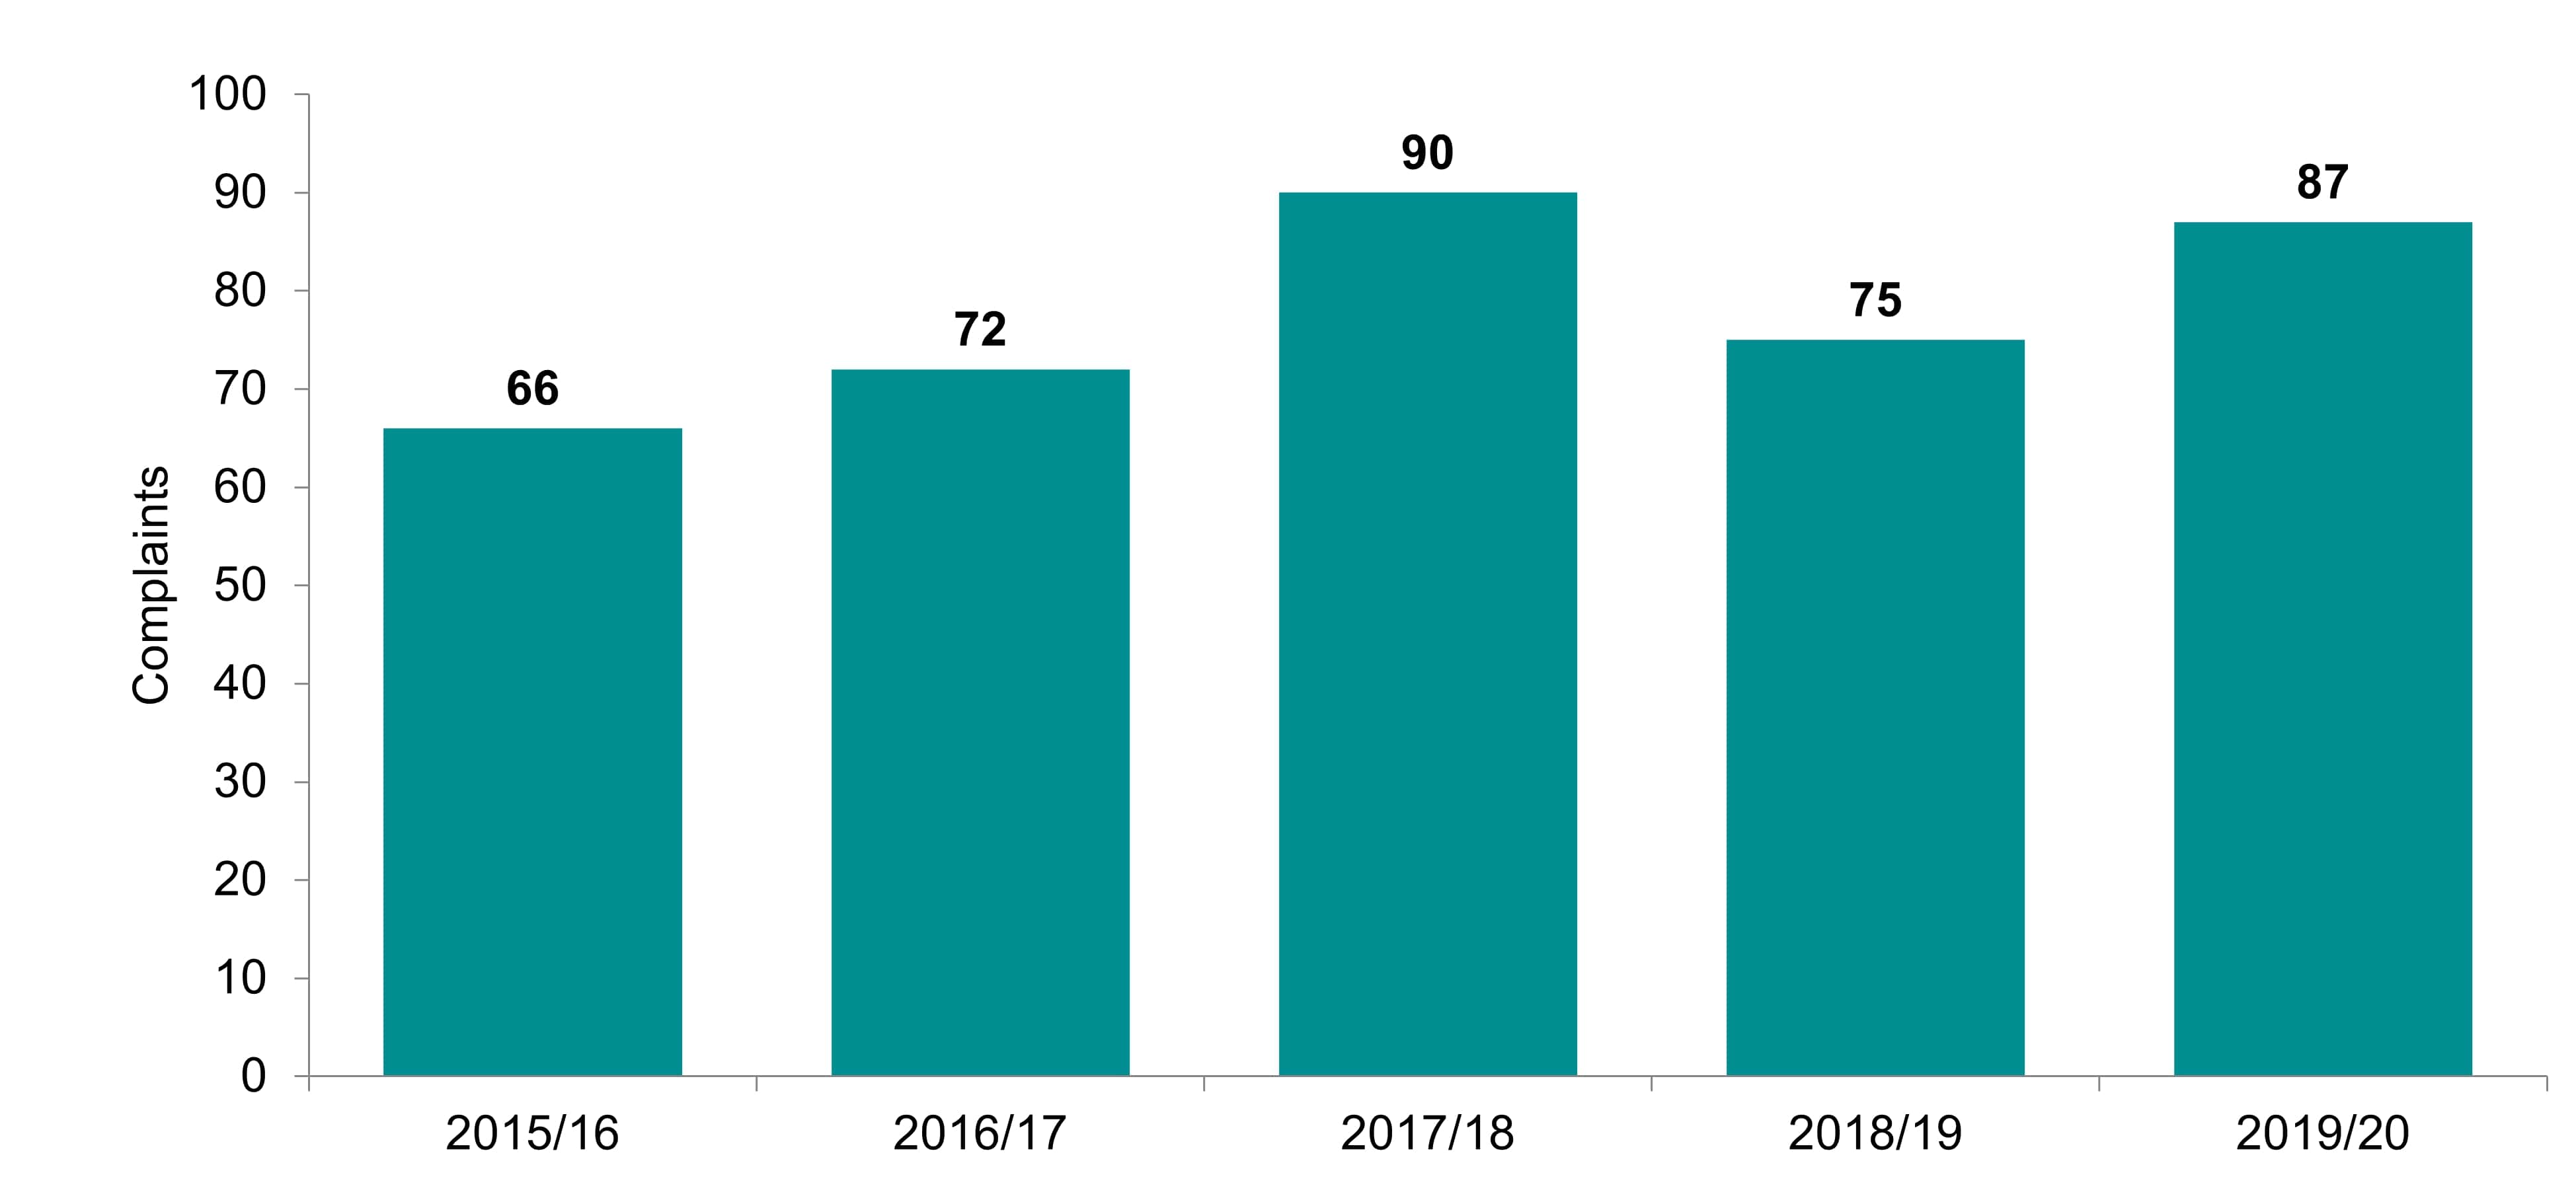 [1. Label] Number of complaints received, 2015/16 - 2019/20. [2. Construction] This bar chart shows the number of complaints received from 2015/16 - 2019/20. [3. Summary] There has been an increase in the number of complaints we have received about clinics, with a total of 87 in 2019/20, which represents a 16% increase from 2018/19. [4. Data] The figures for complaints by year are 2015/16, 66; 2016/17, 72; 2017/18, 90; 2018/19, 75; 2019/20, 87.